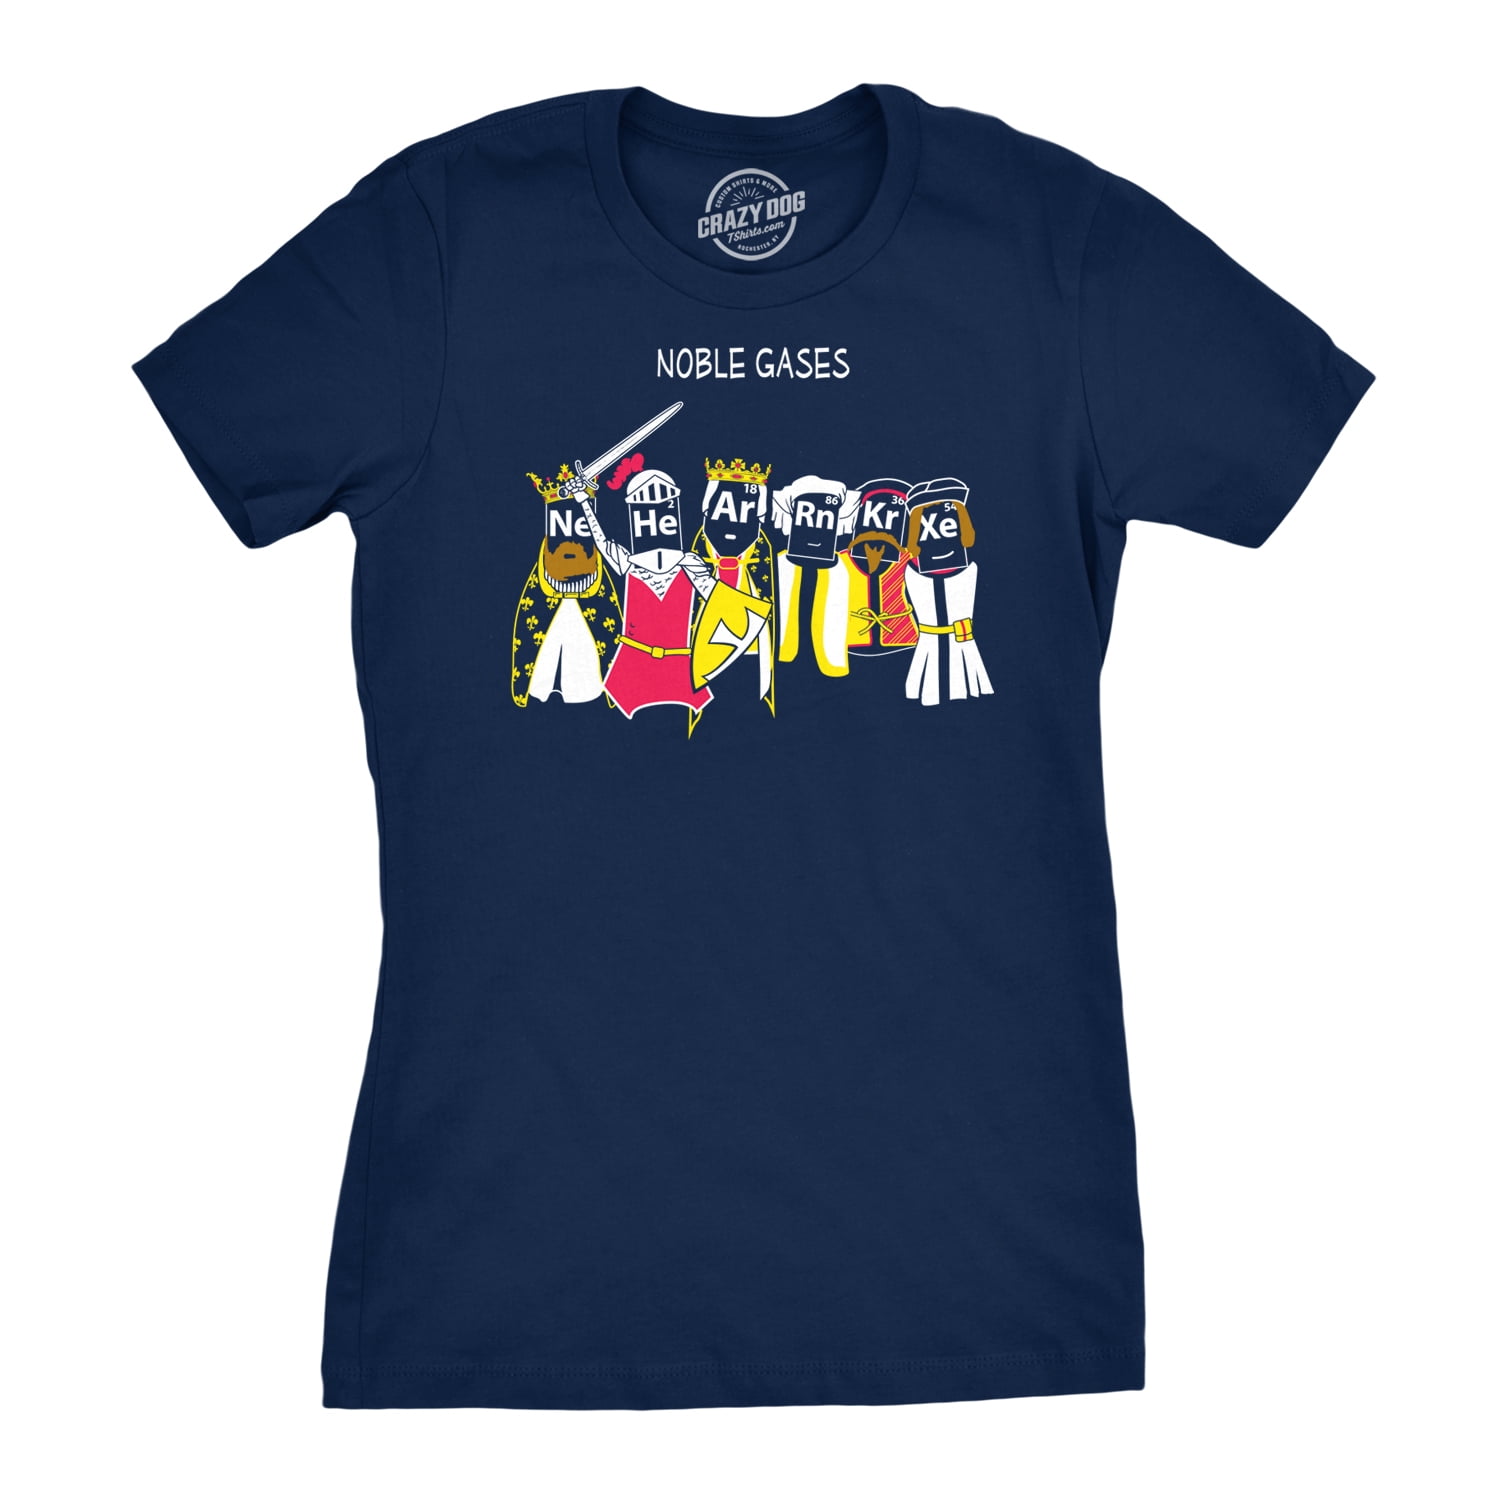 Womens Noble Gases Science T Shirt Funny Nerdy Tee for Geeks Cool